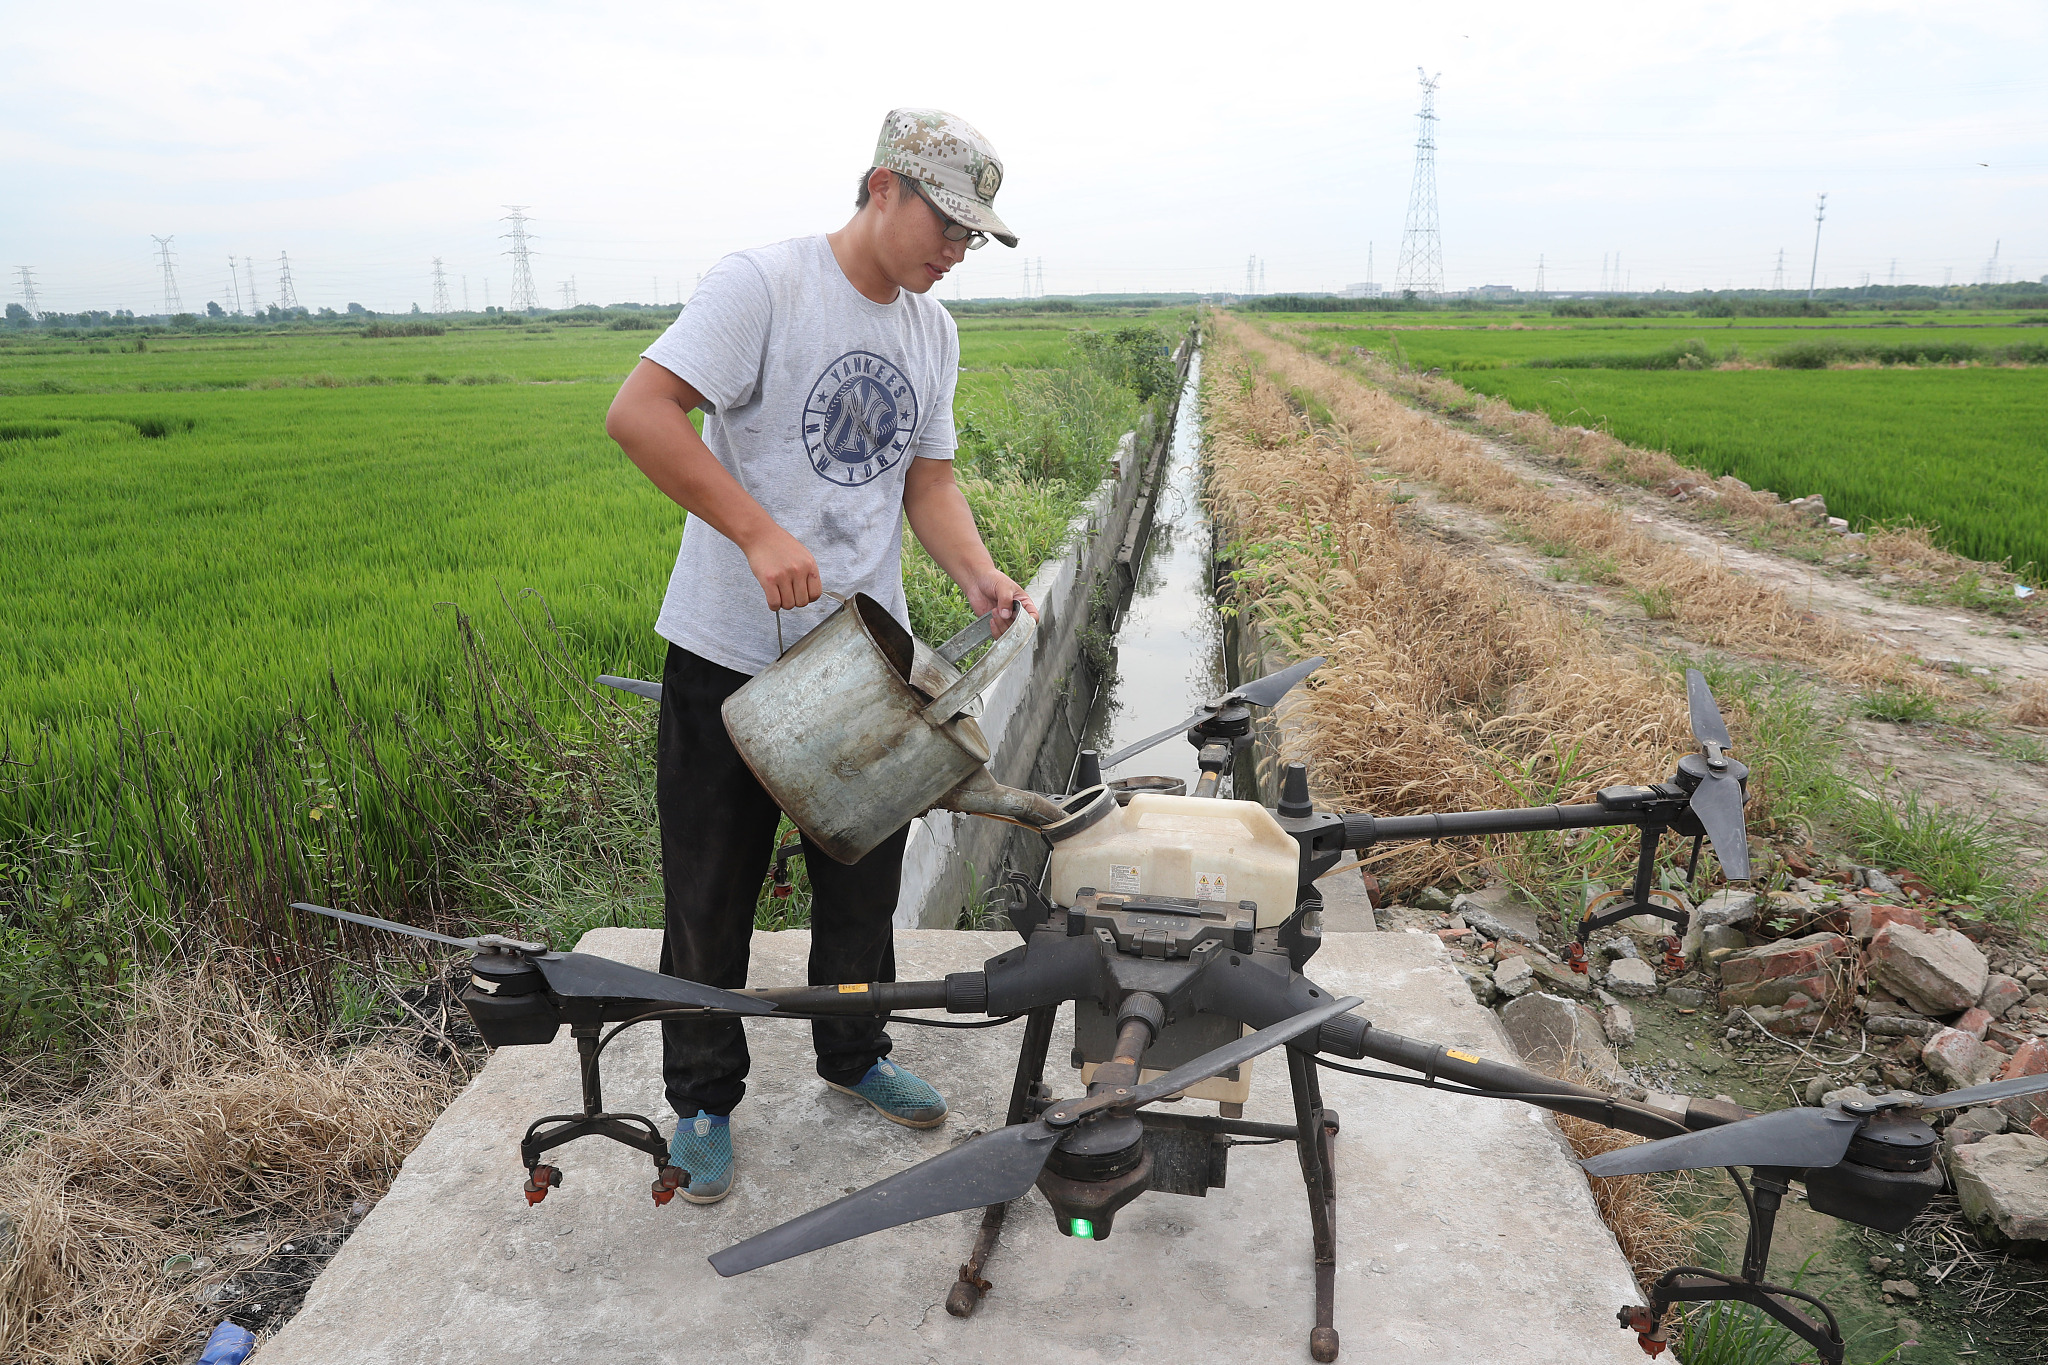 A farmer uses a drone for pesticides spraying in Nantong, Jiangsu Province, August 7, 2020.